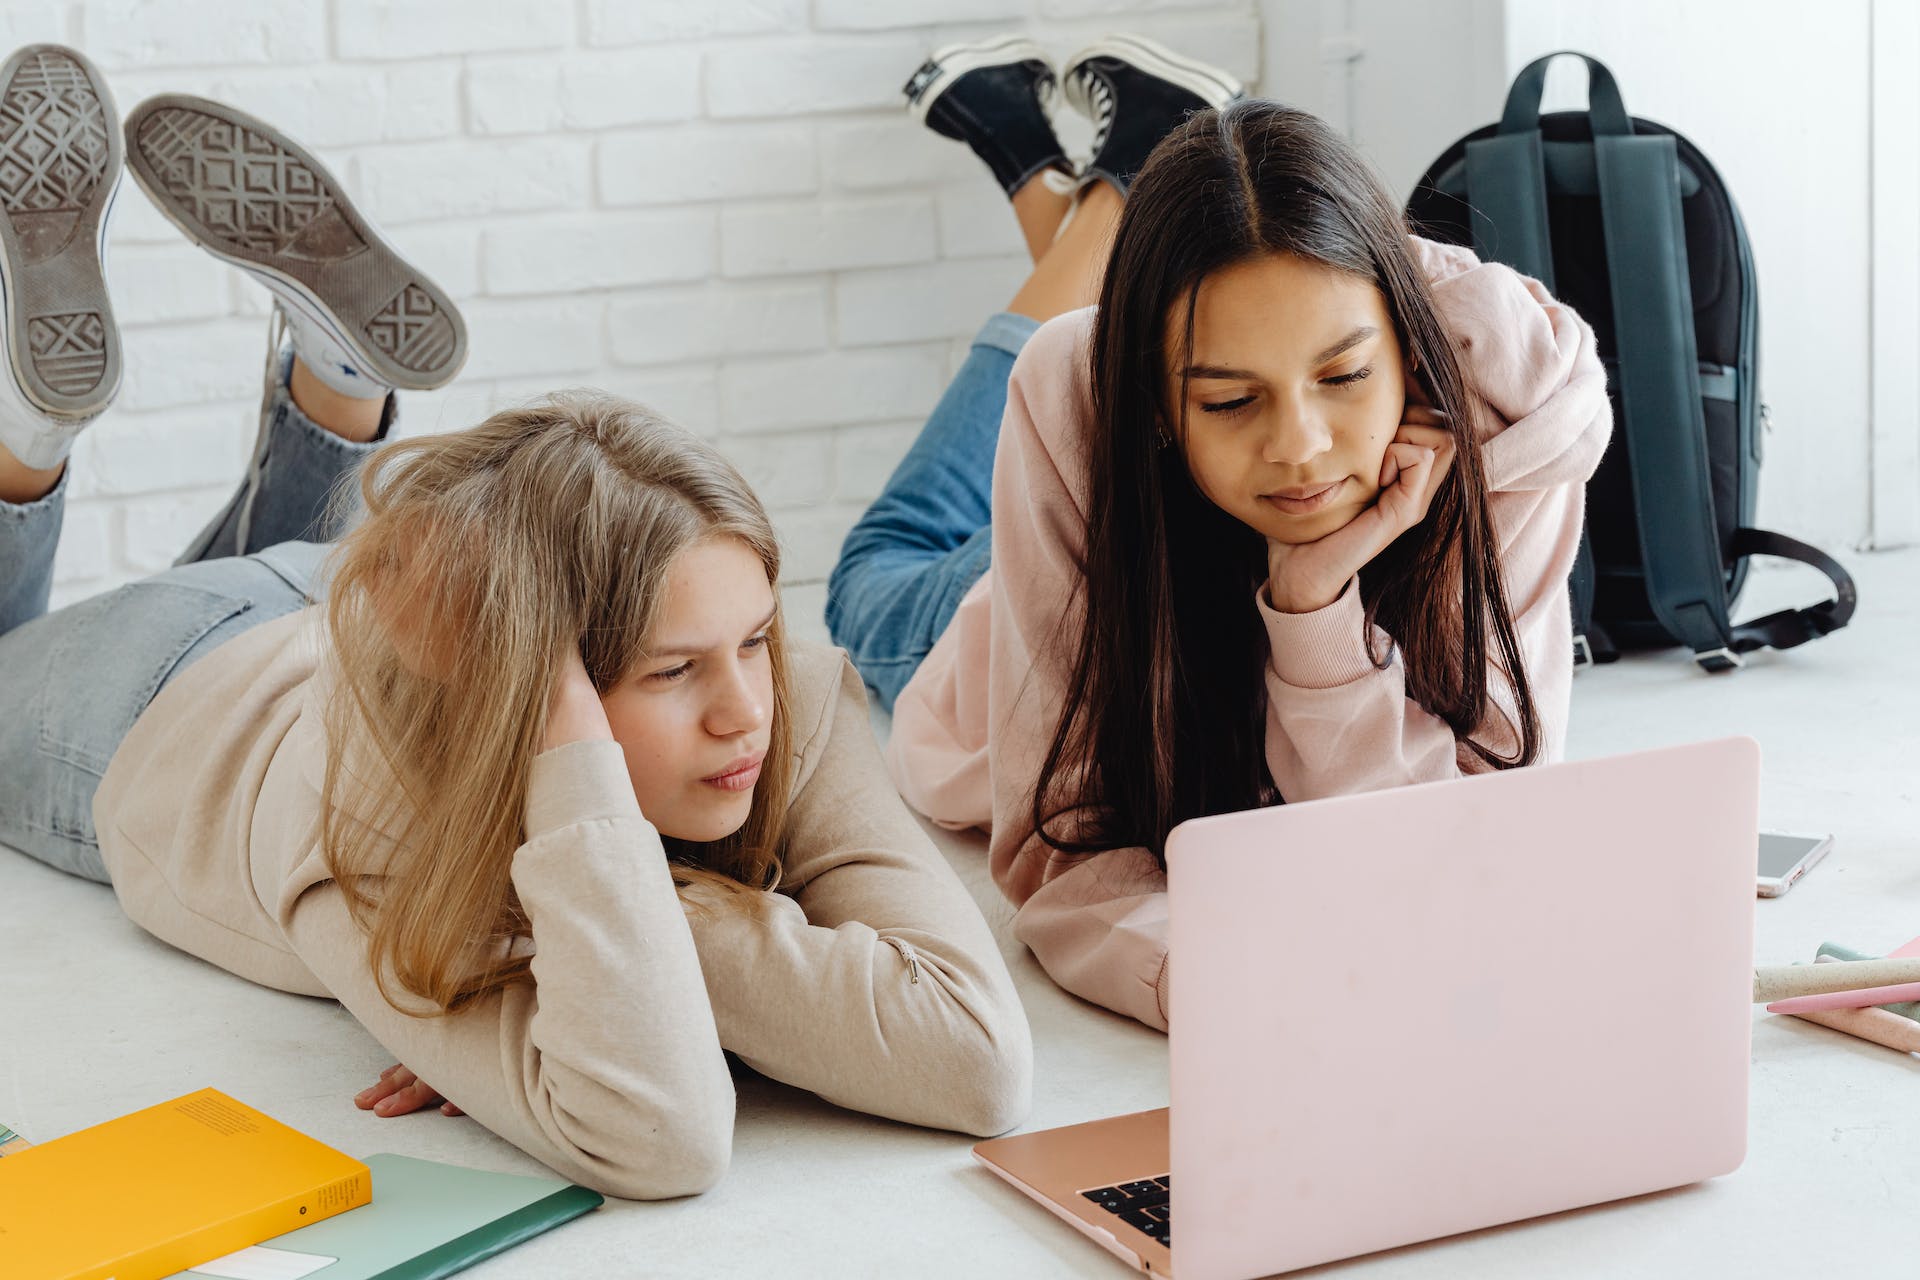 Two young girls using a laptop | Source: Pexels